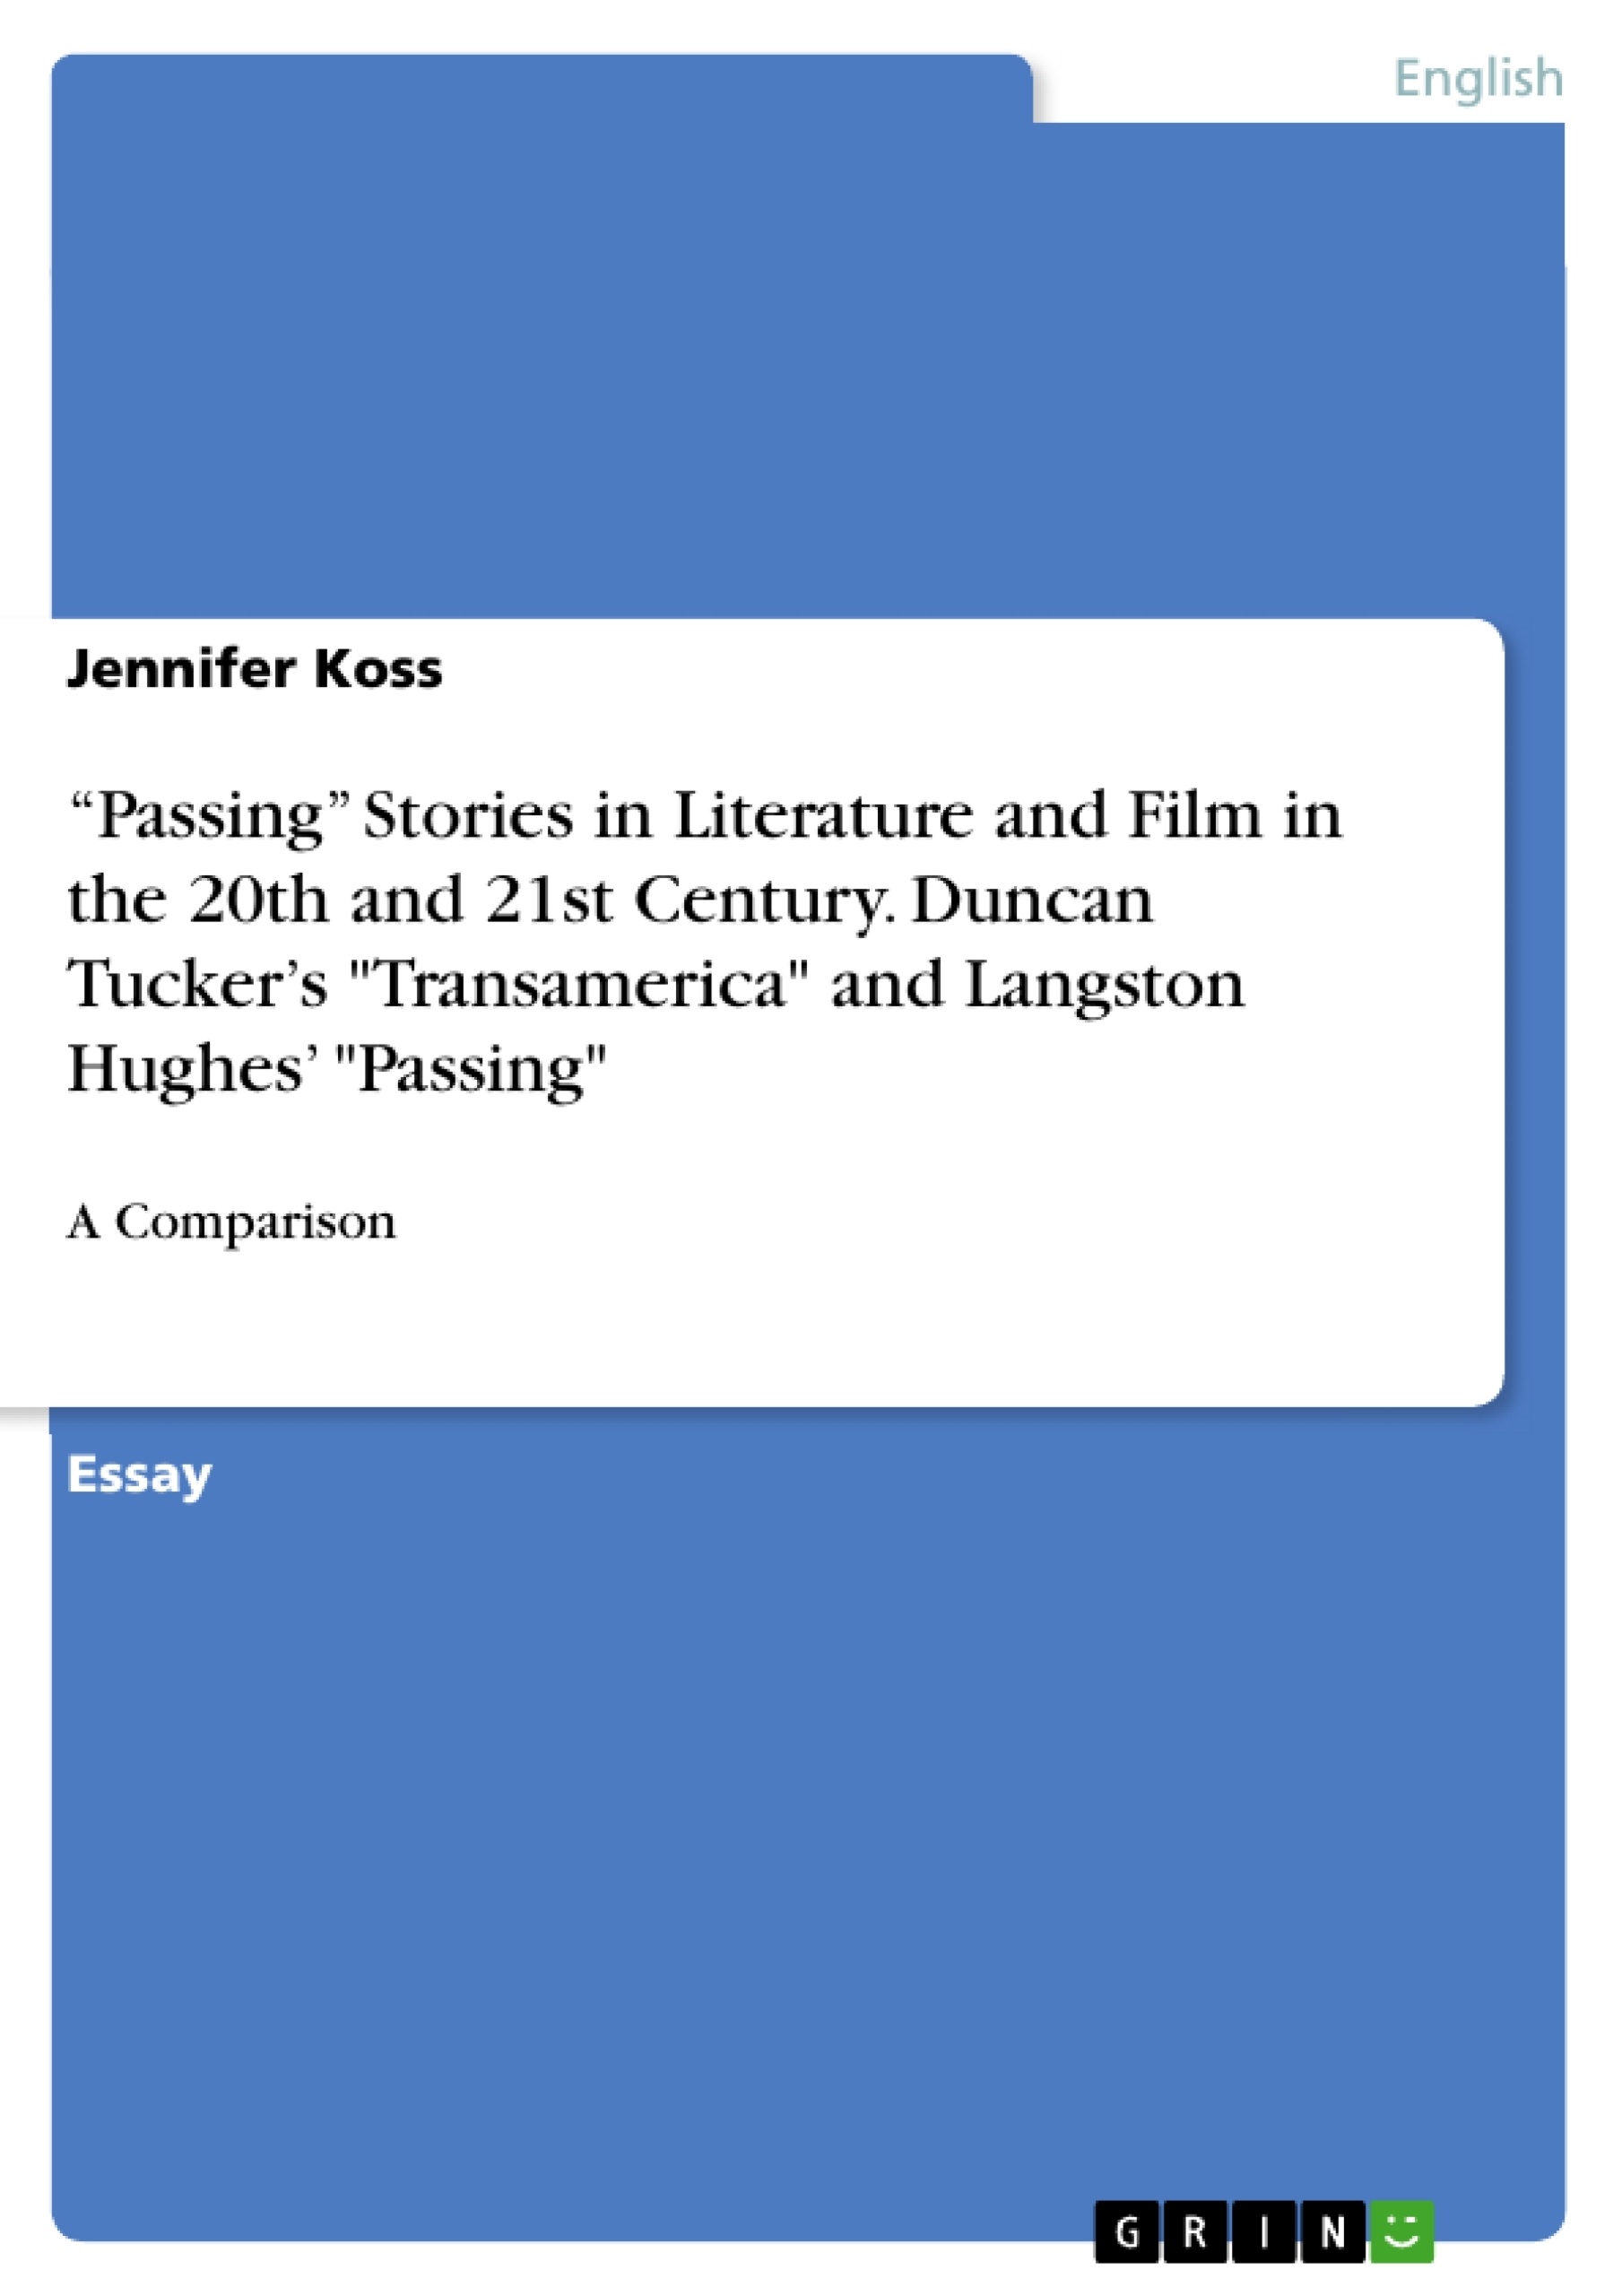 Titel: “Passing” Stories in Literature and Film in the 20th and 21st Century. Duncan Tucker’s "Transamerica" and Langston Hughes’ "Passing"